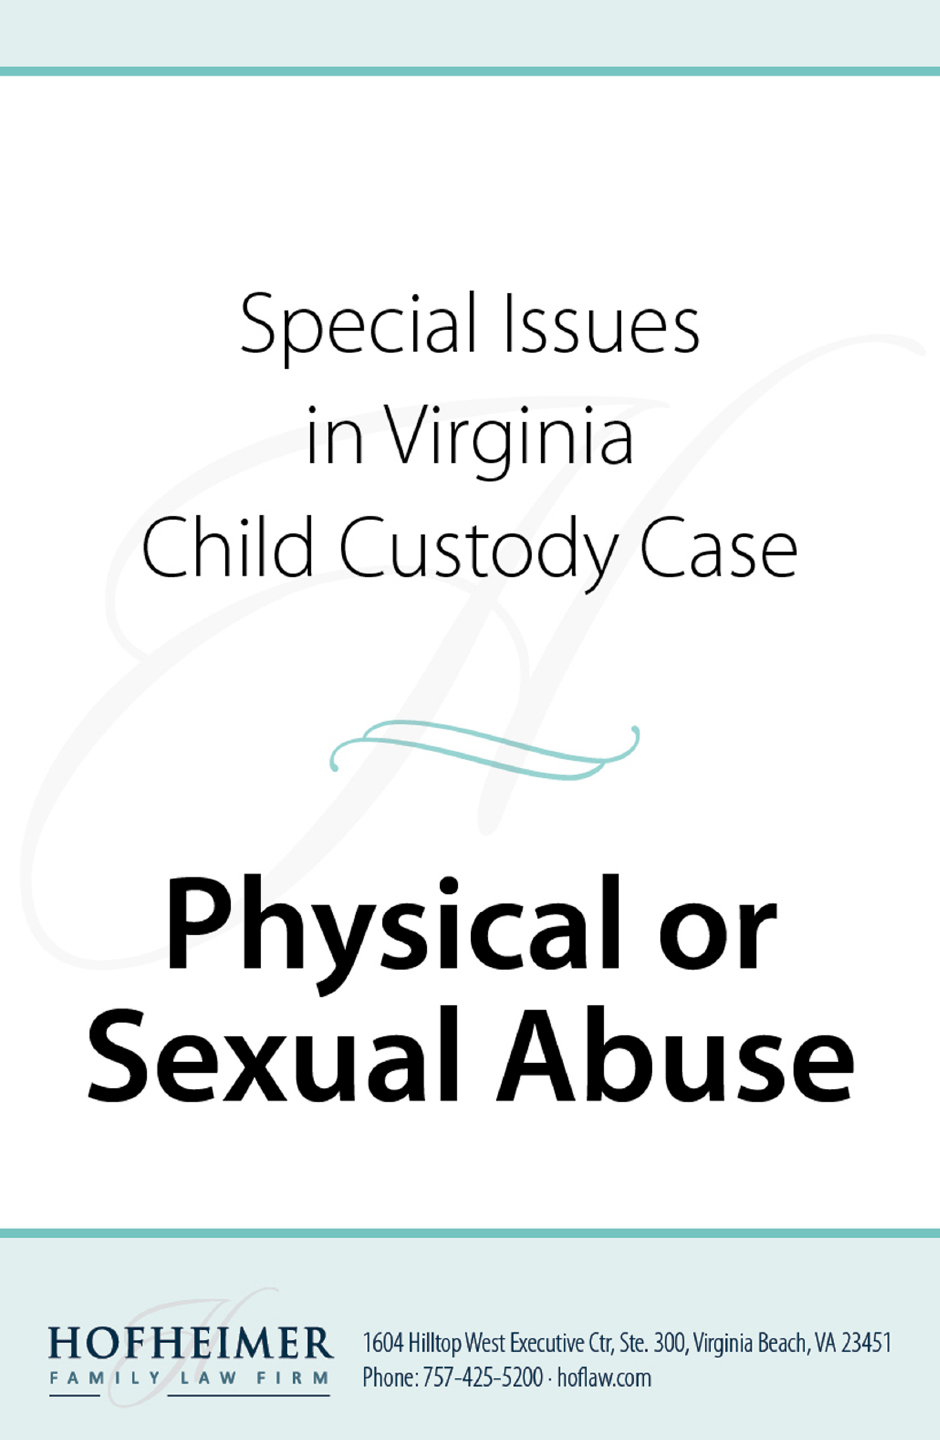 Special Issues in Virginia Child Custody Cases: Physical or Sexual Abuse